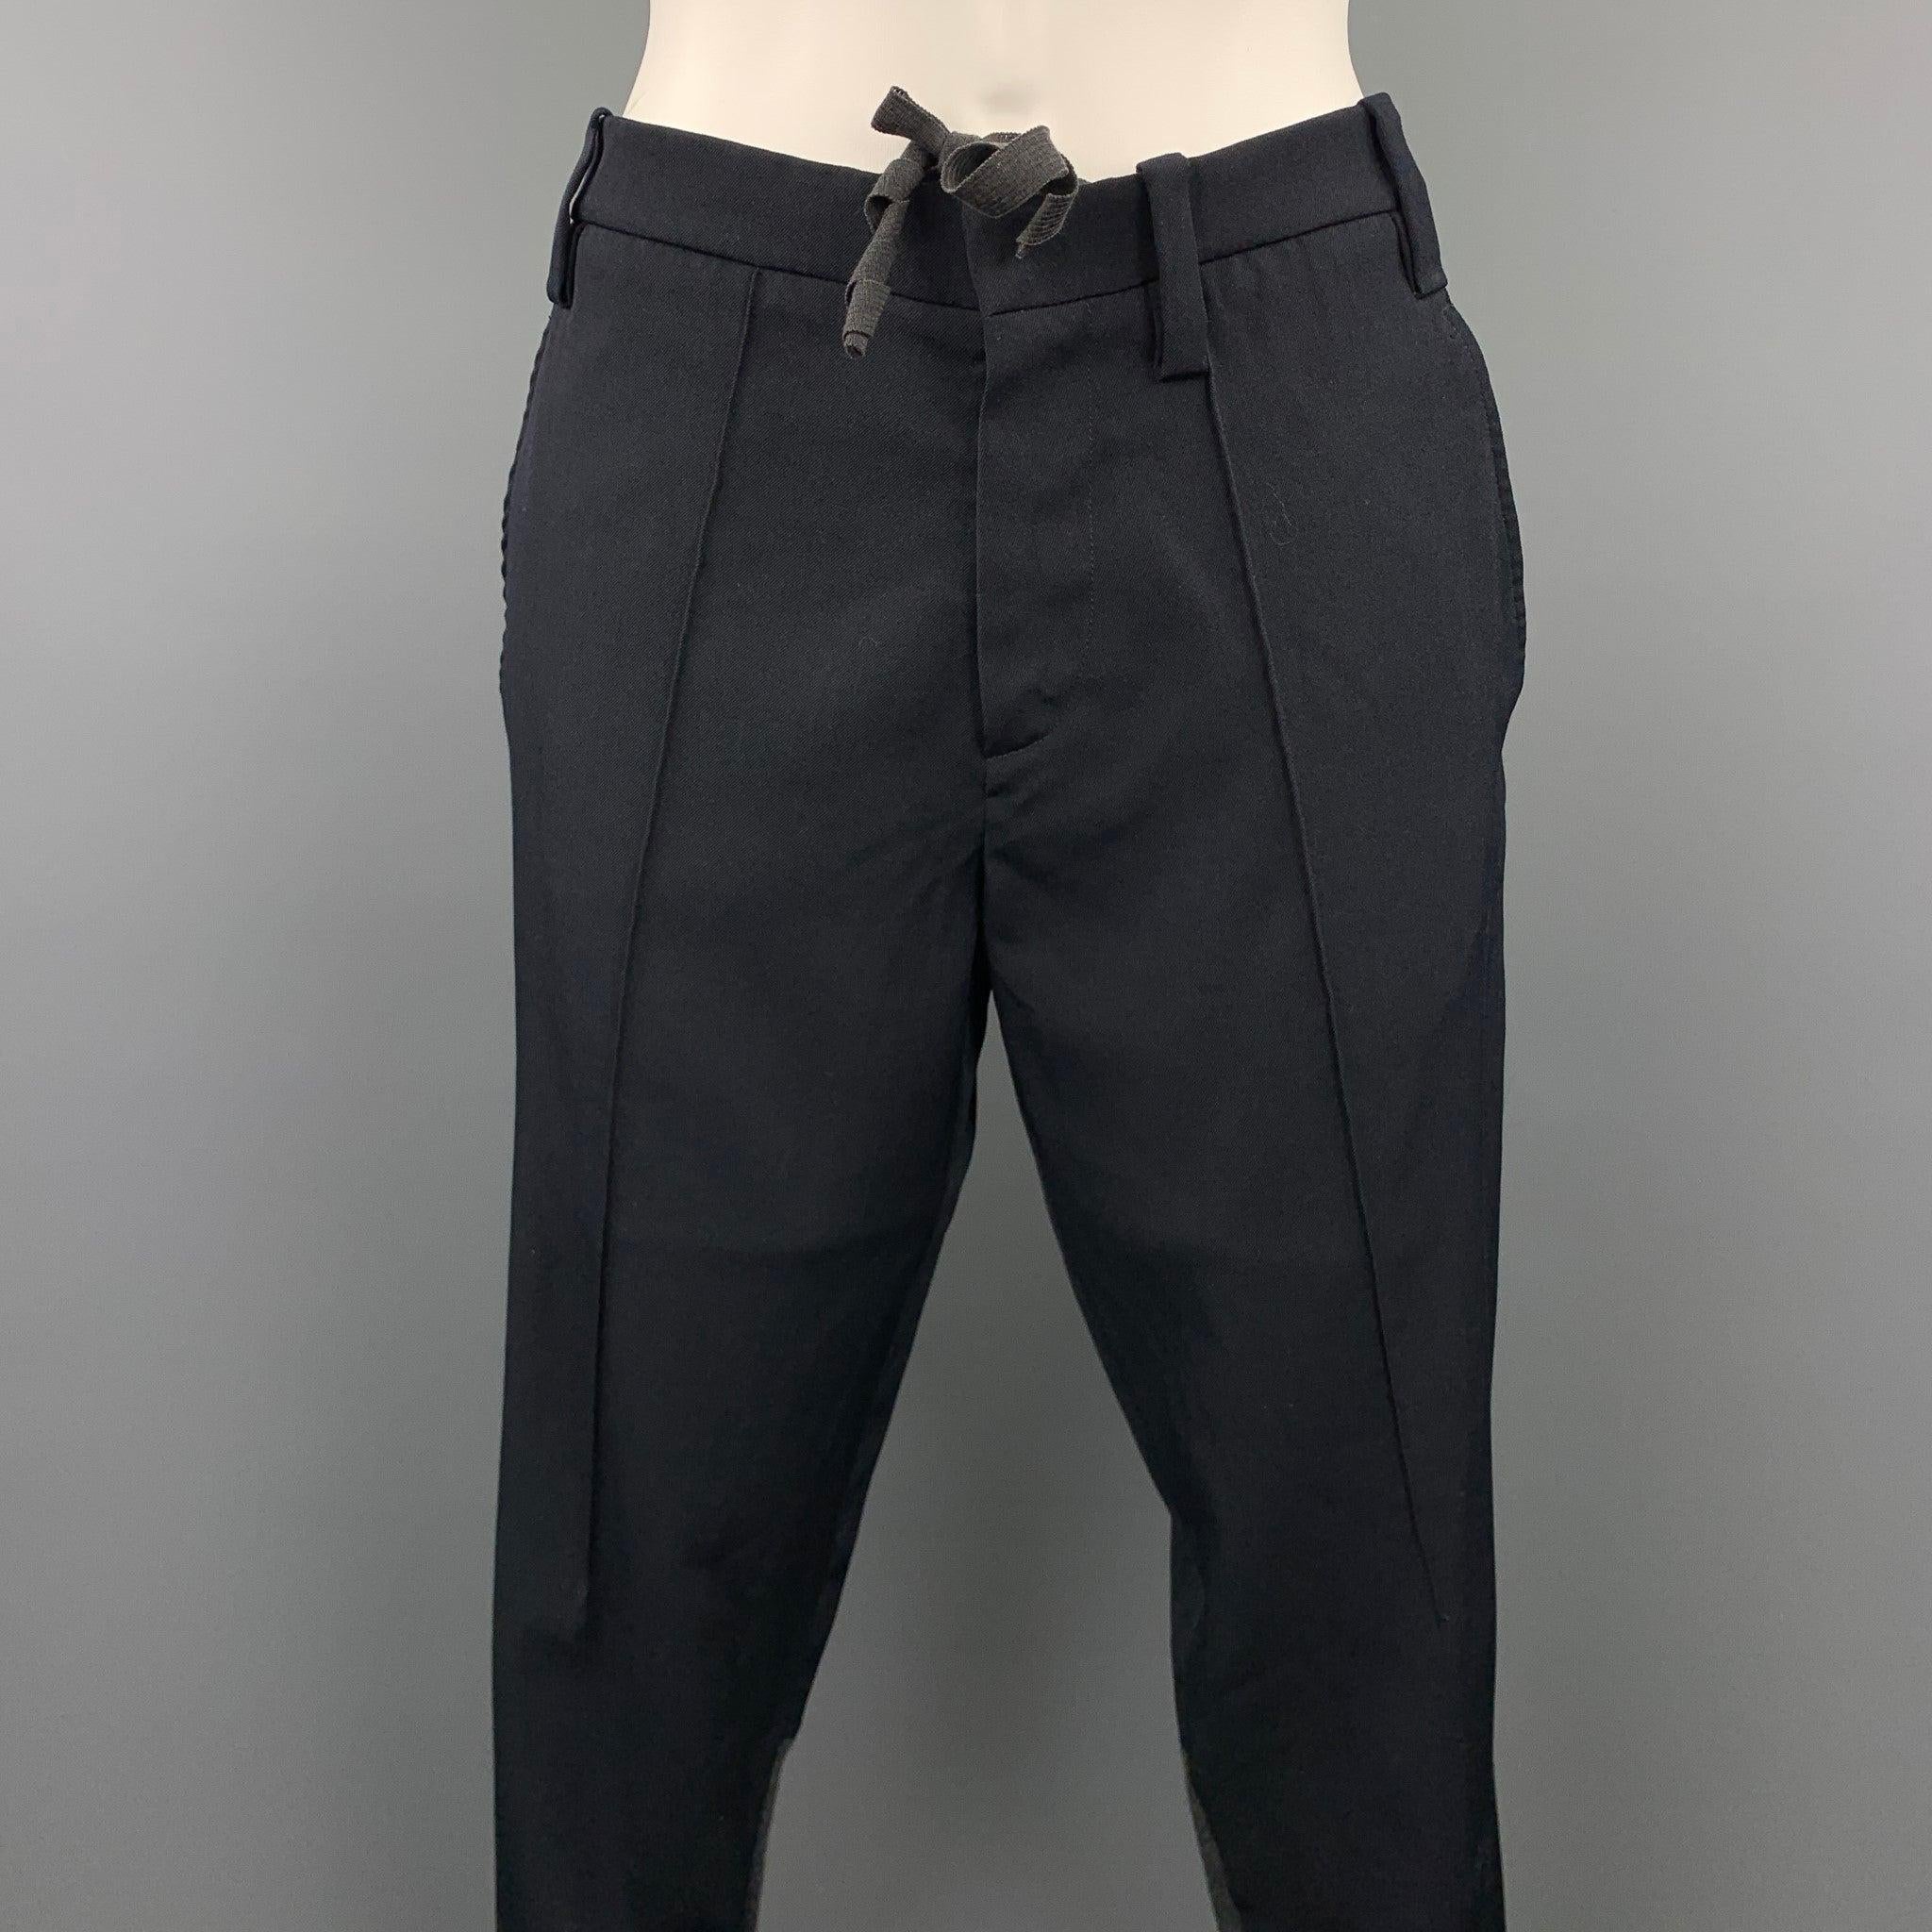 MARNI casual pants comes in a black virgin wool with a knitted patch featuring a skinny fit, draw string, and a zip up closure. Made in Portugal.Good
Pre-Owned Condition. 

Marked:   38 

Measurements: 
  Waist: 32 inches 
Rise: 8.5 inches 
Inseam: